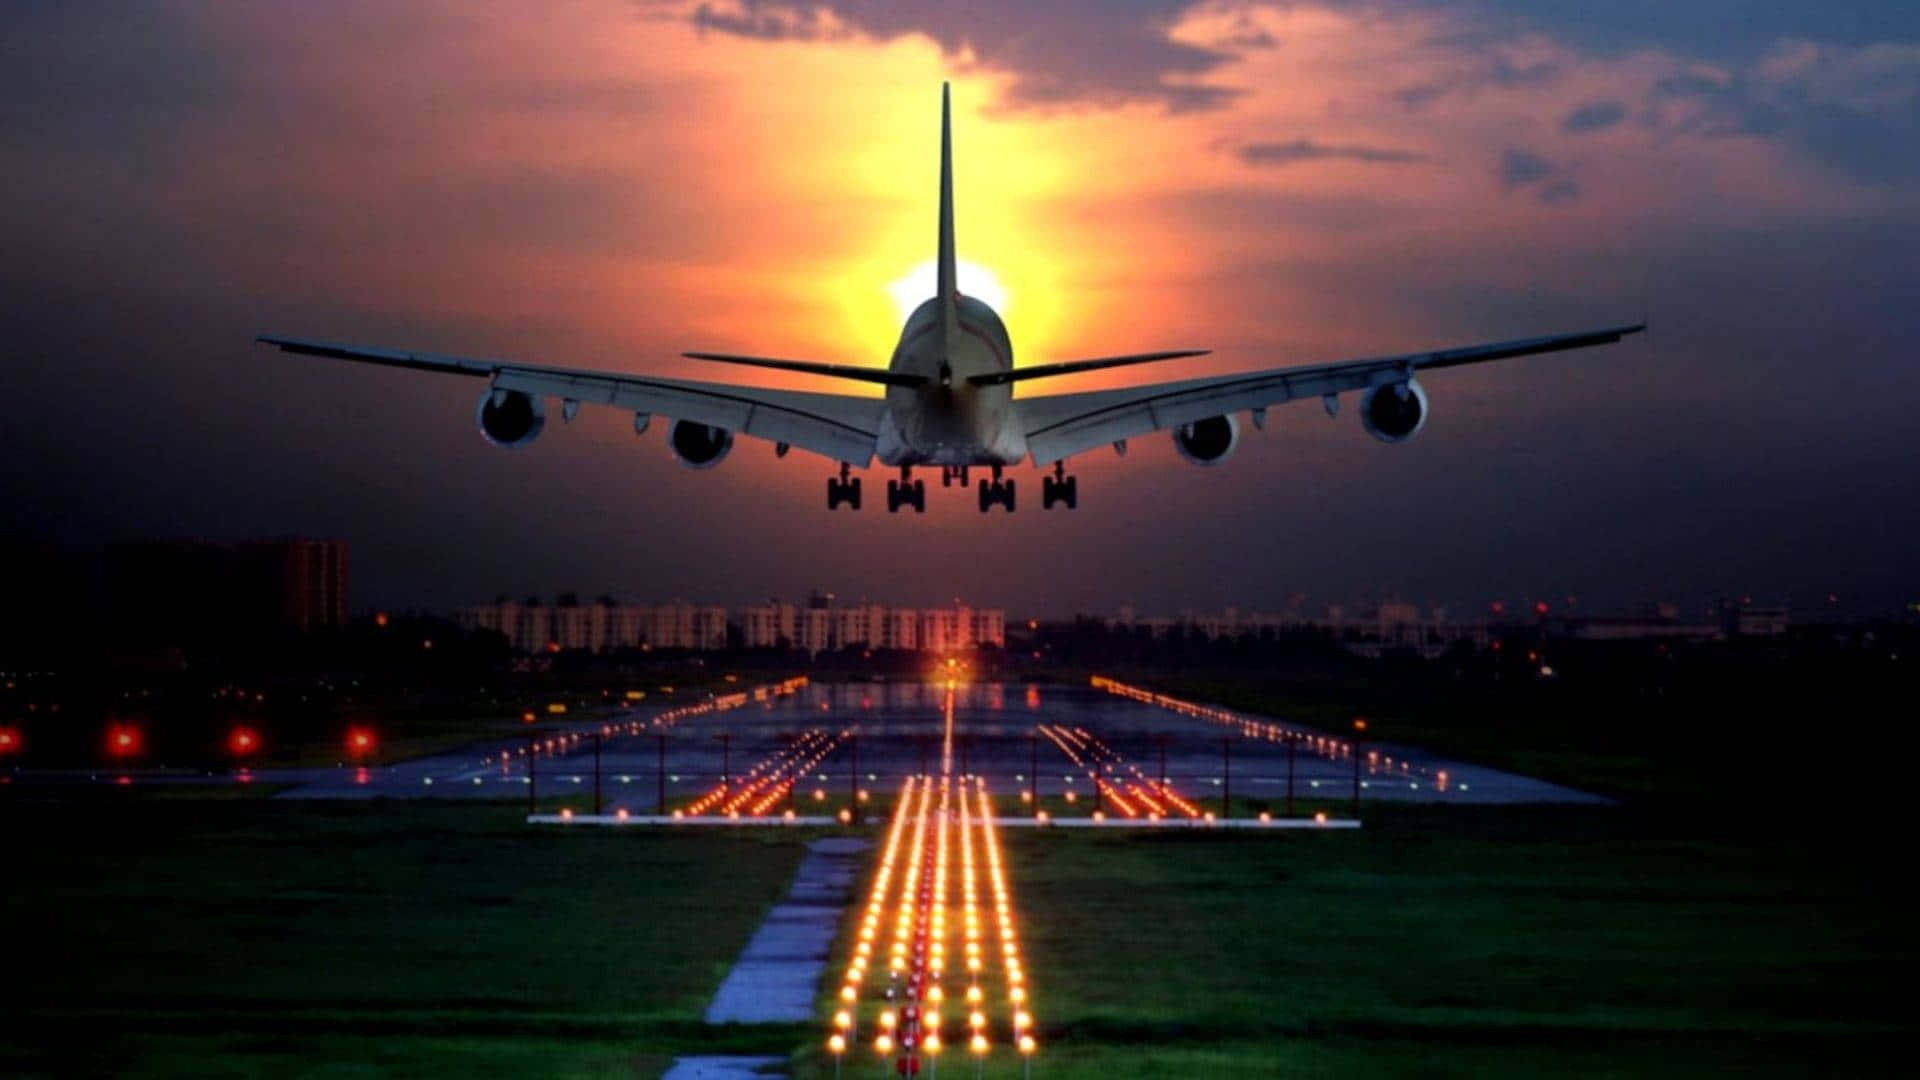 Sunset And Departing Plane Background Wallpaper